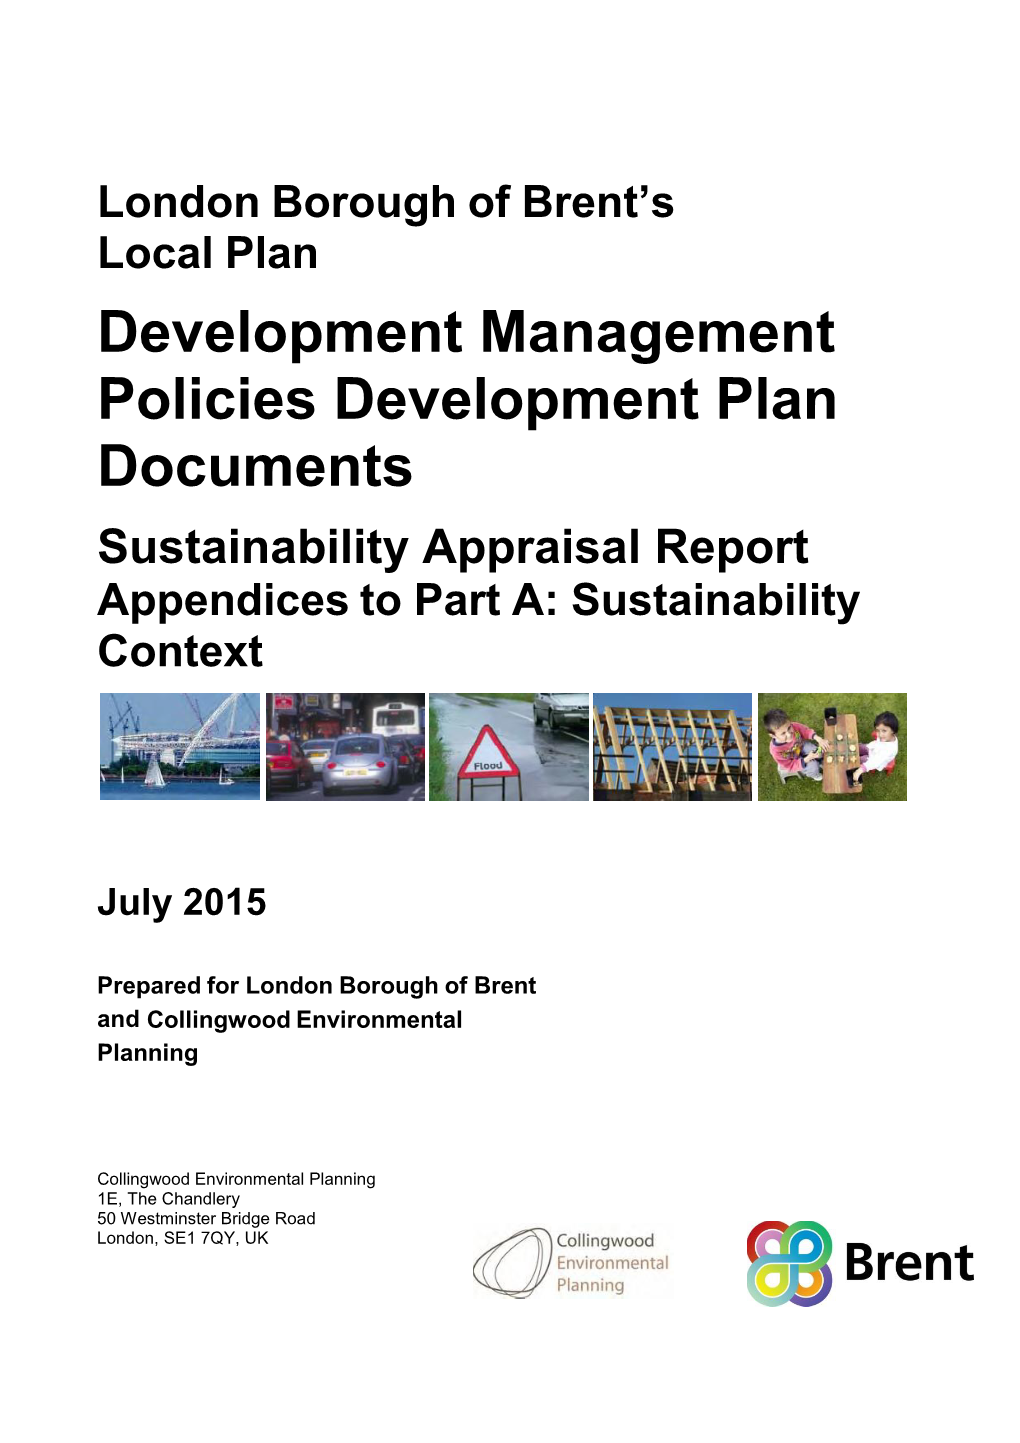 Sustainability Appraisal Appendices